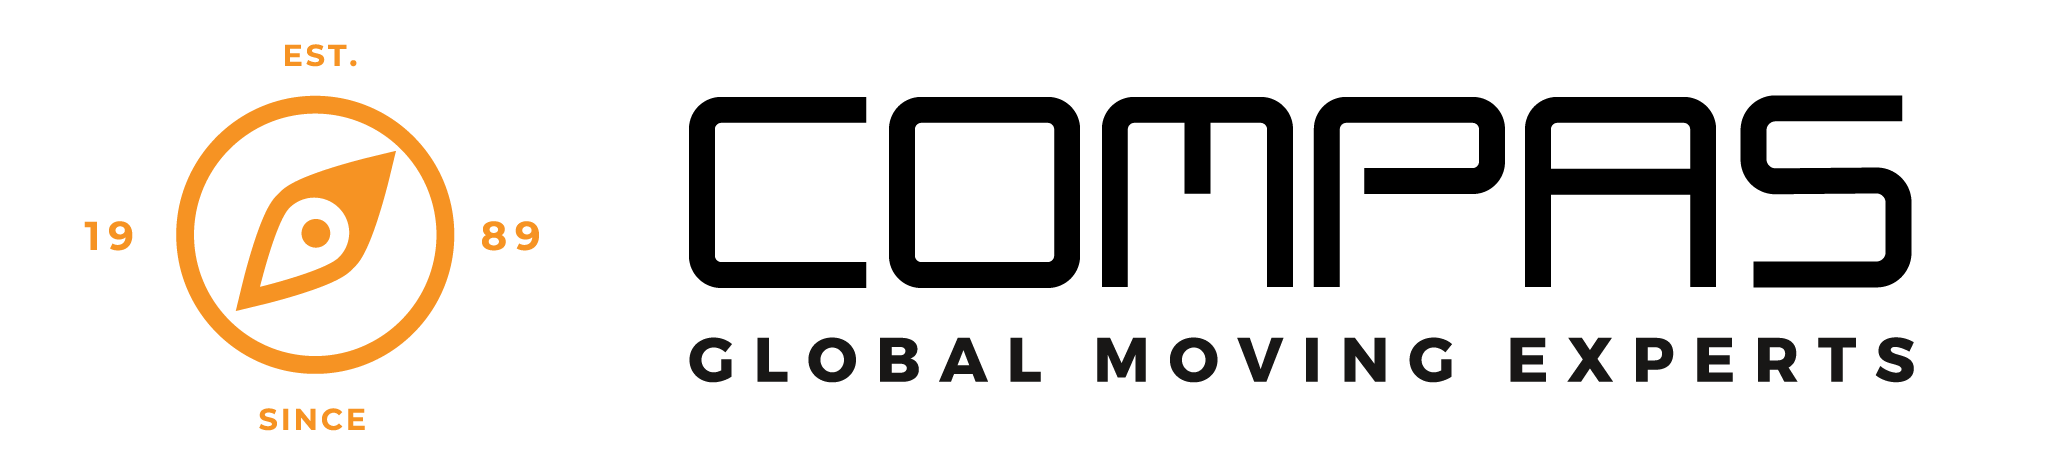 Compas Mobility Solutions-International Movers & Forwarders since 1989